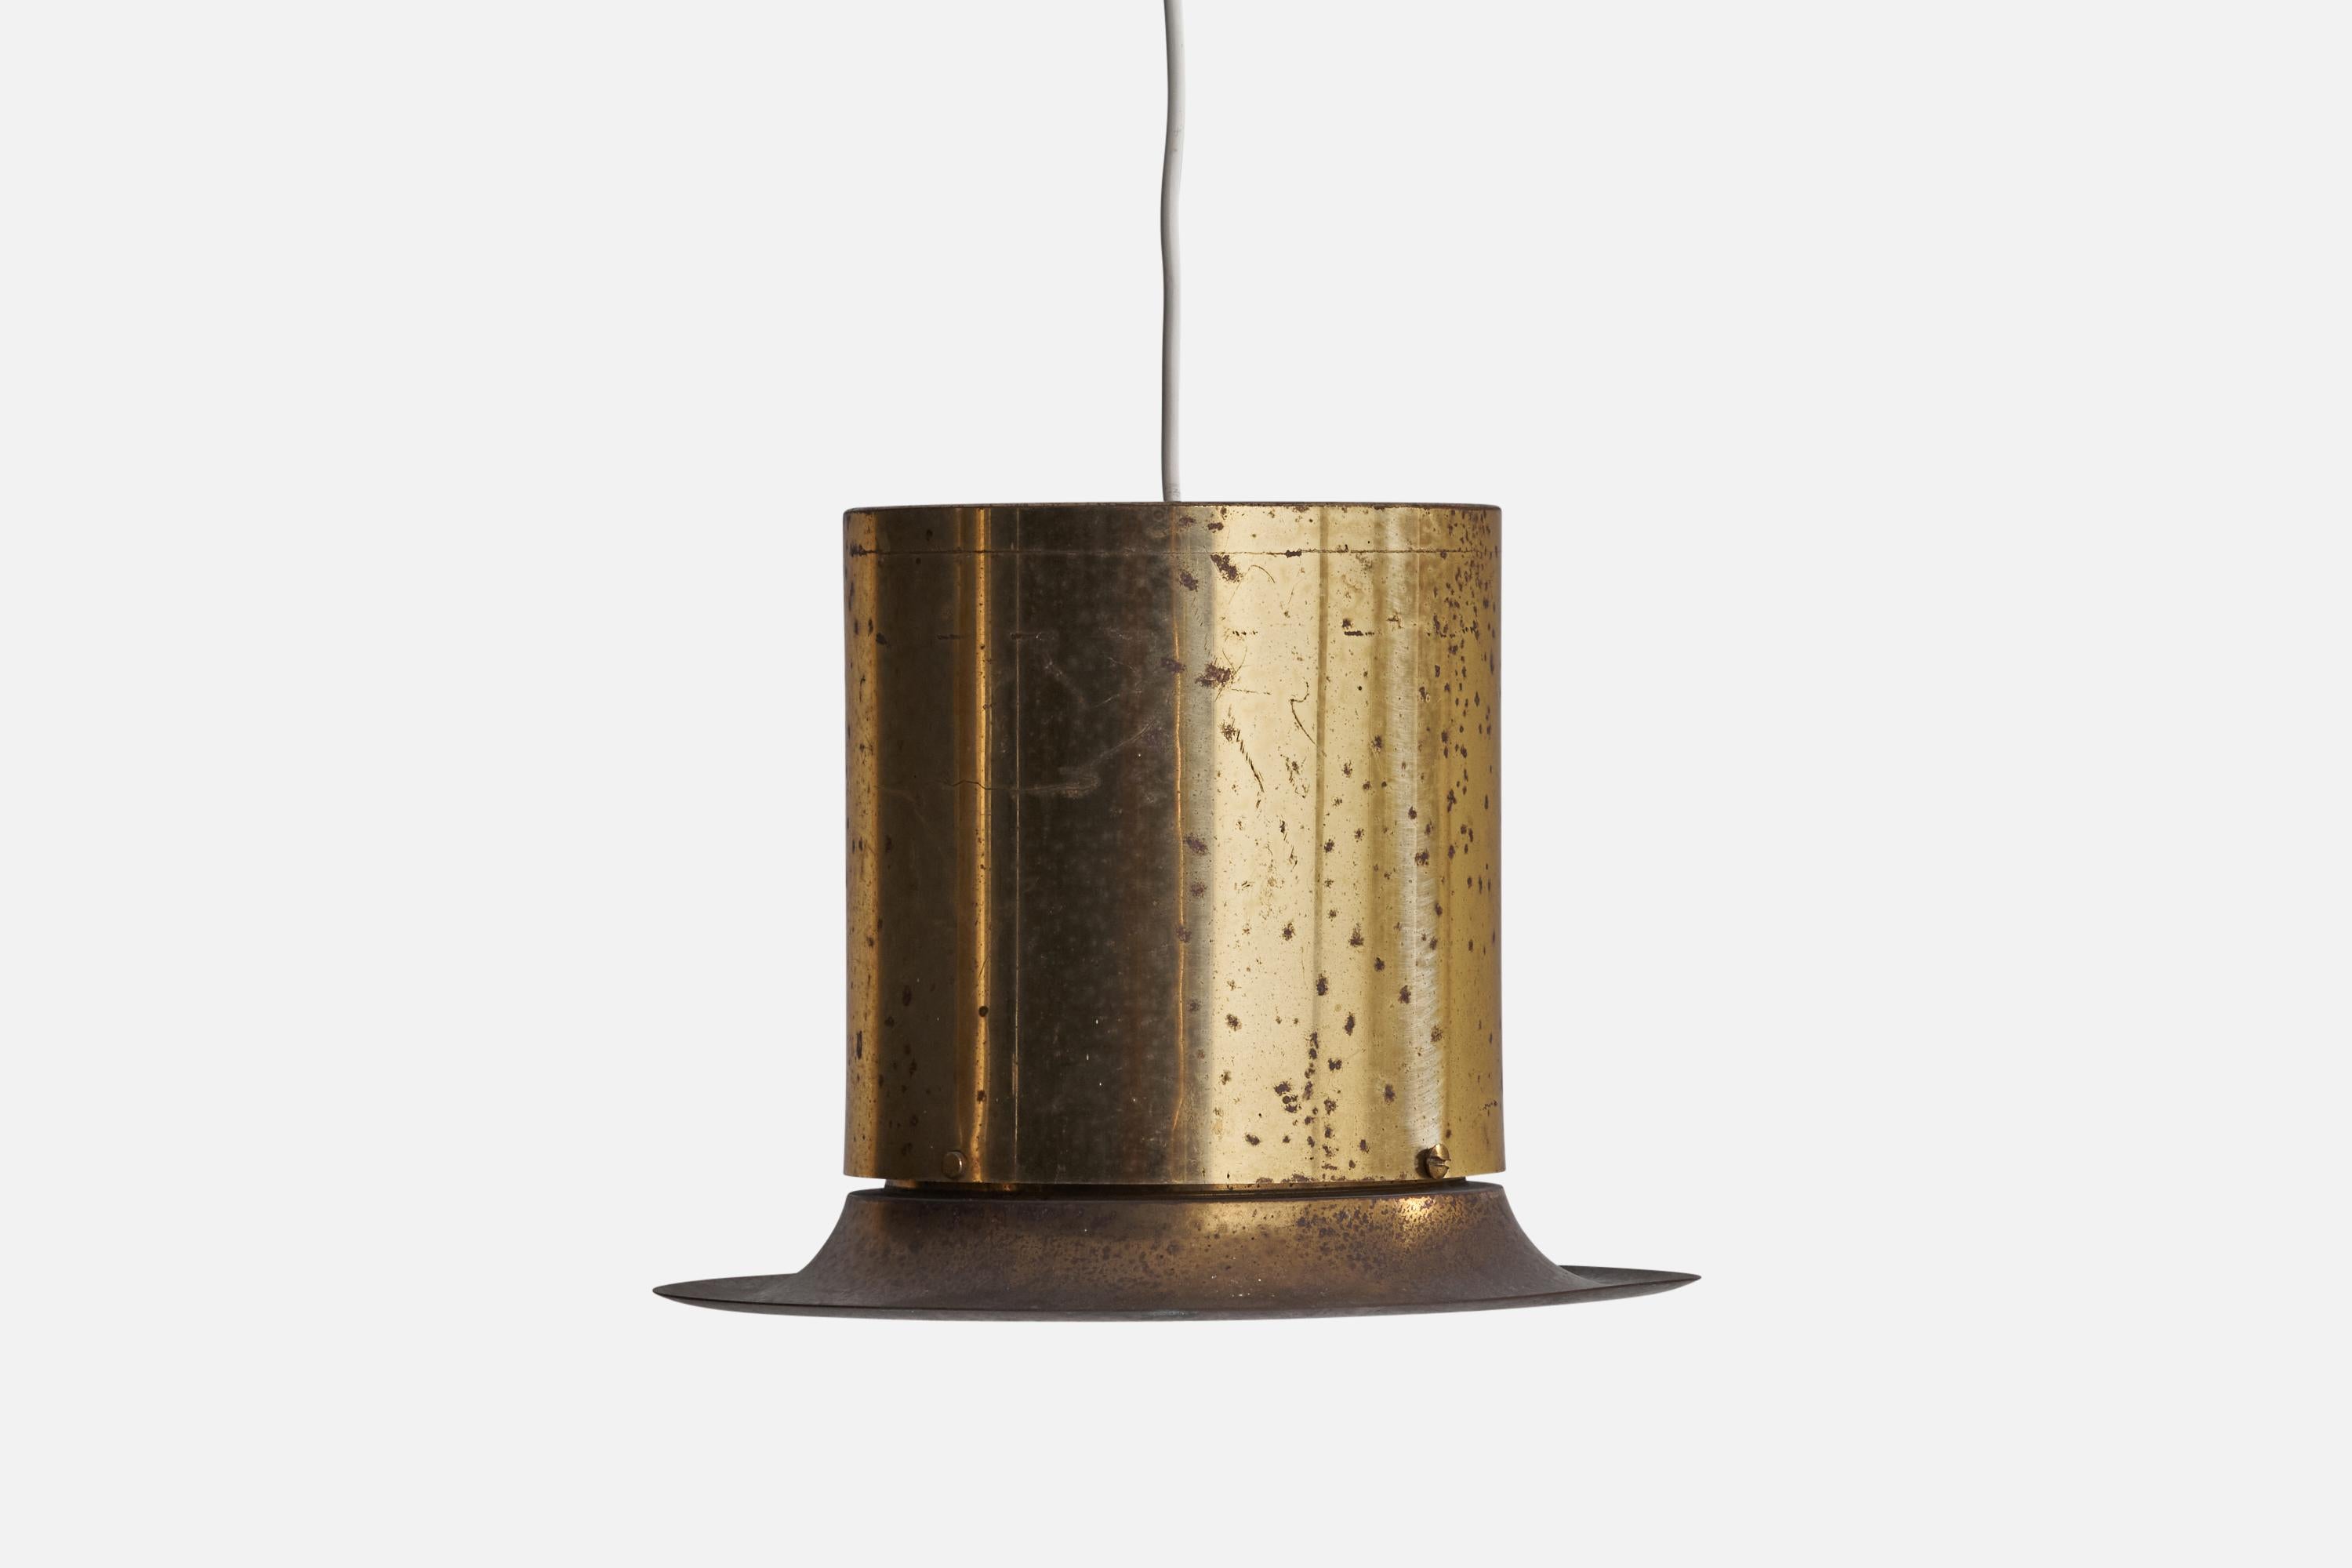 A brass pendant light designed and produced by Hans-Agne Jakobsson, Markaryd, Sweden, 1960s.

Dimensions of canopy (inches): n/a
Socket takes standard E-26 bulbs. 1 socket.There is no maximum wattage stated on the fixture. All lighting will be